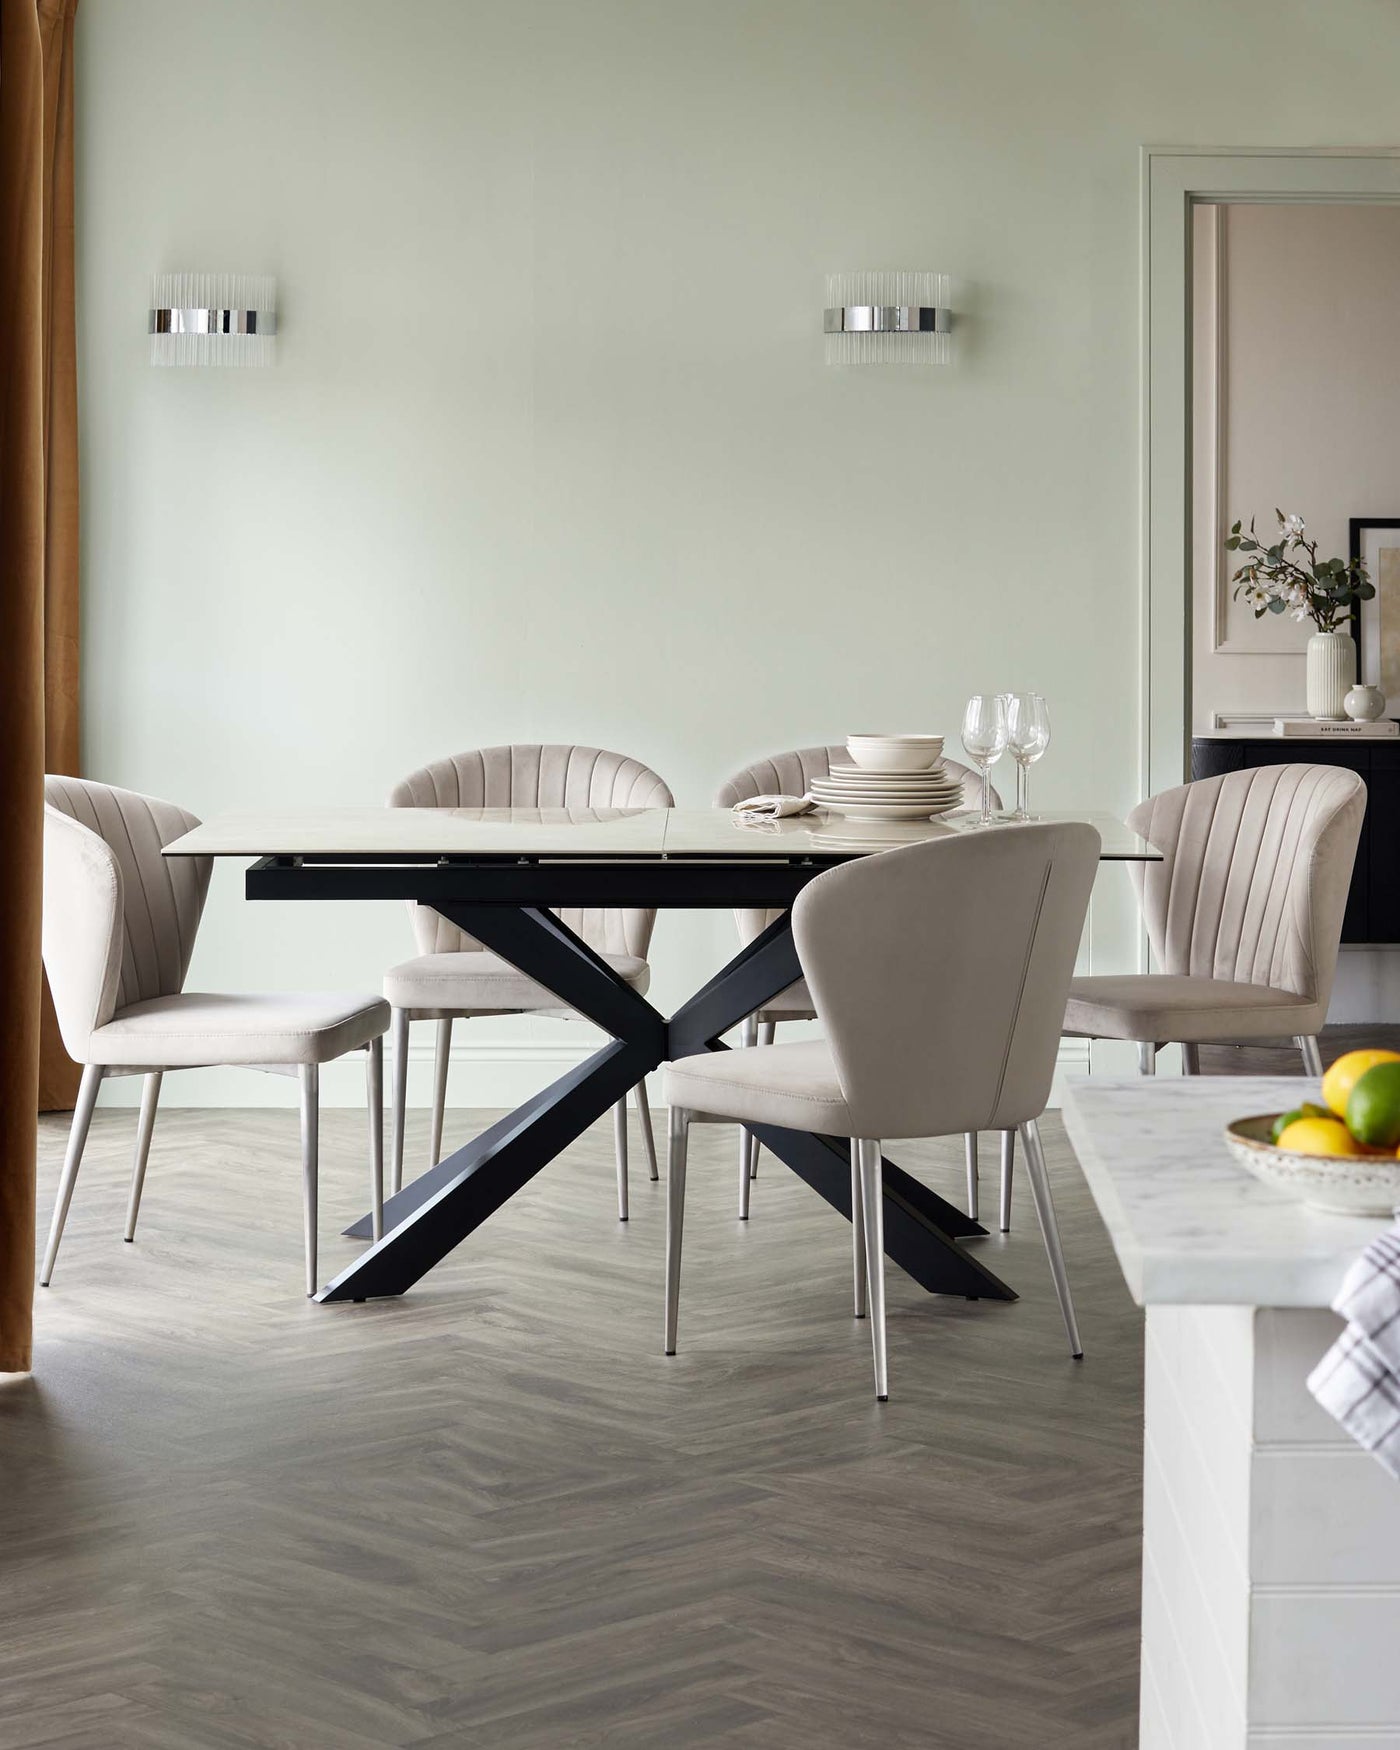 A modern dining set with a rectangular table featuring a black top and a bold X-shaped metal base. Includes six contemporary upholstered chairs in a soft beige tone, with a comfortably curved backrest and slender metal legs. The set is displayed in an elegantly simple room with a light grey wood flooring.